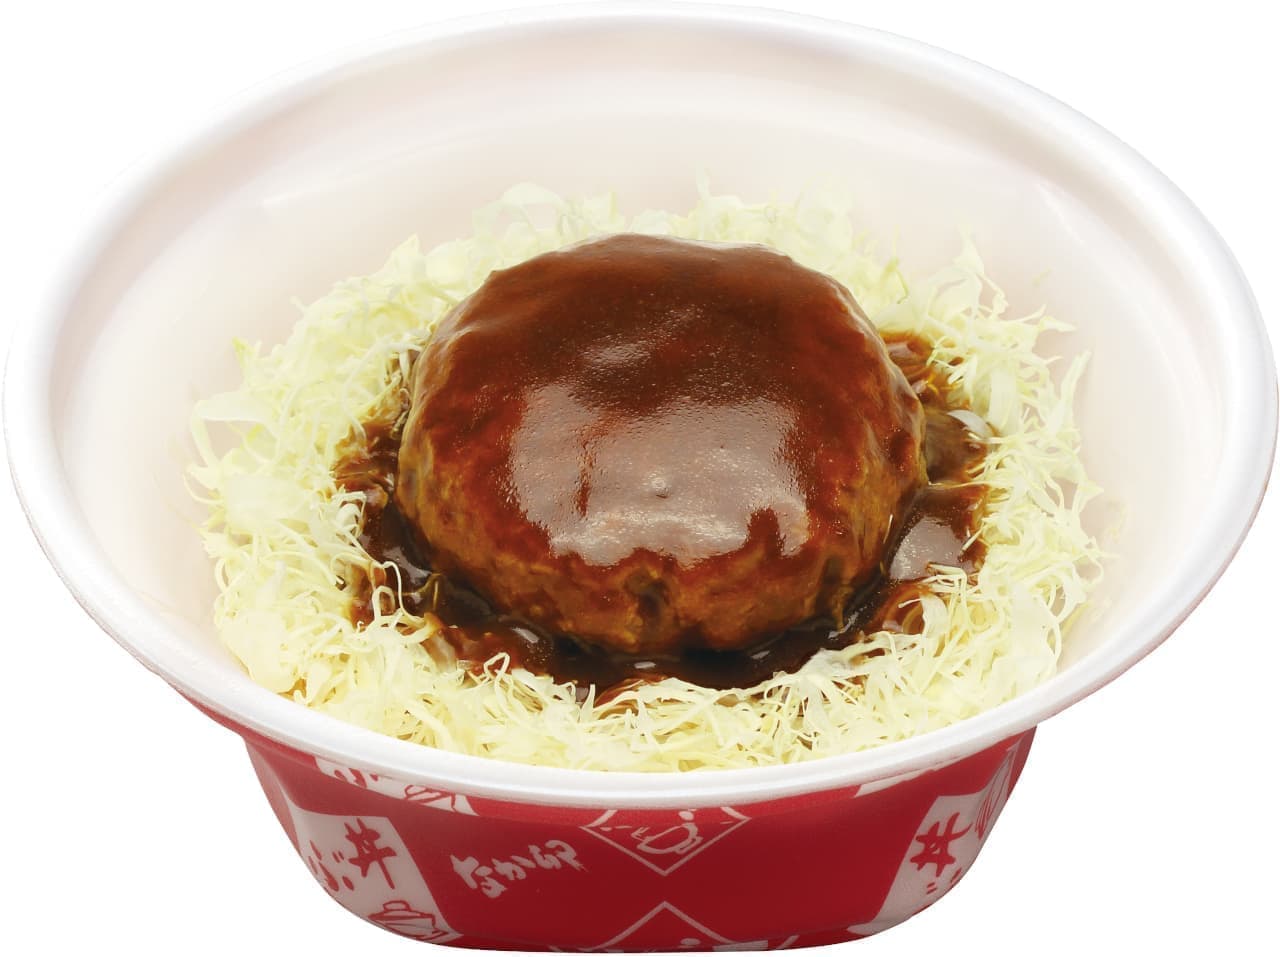 Nakau has one coin "Donburi Bento" for To go only